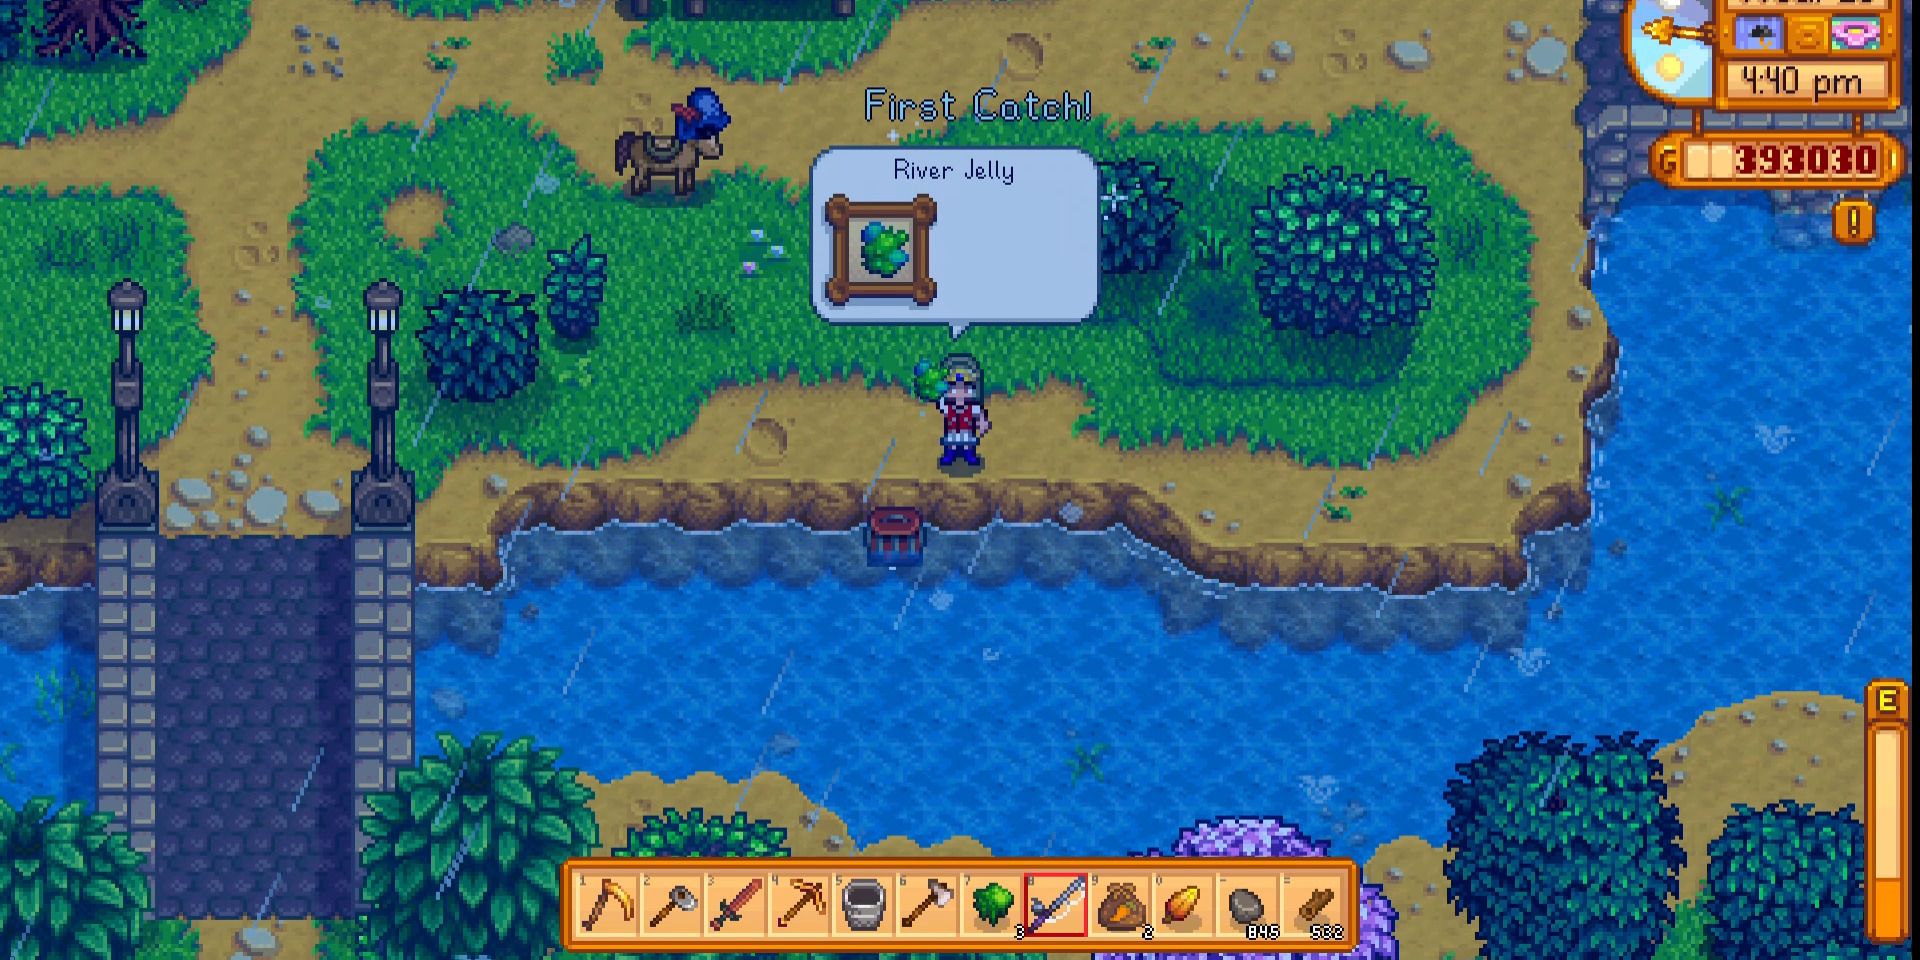 Image of a character after catching a river jelly in Stardew Valley